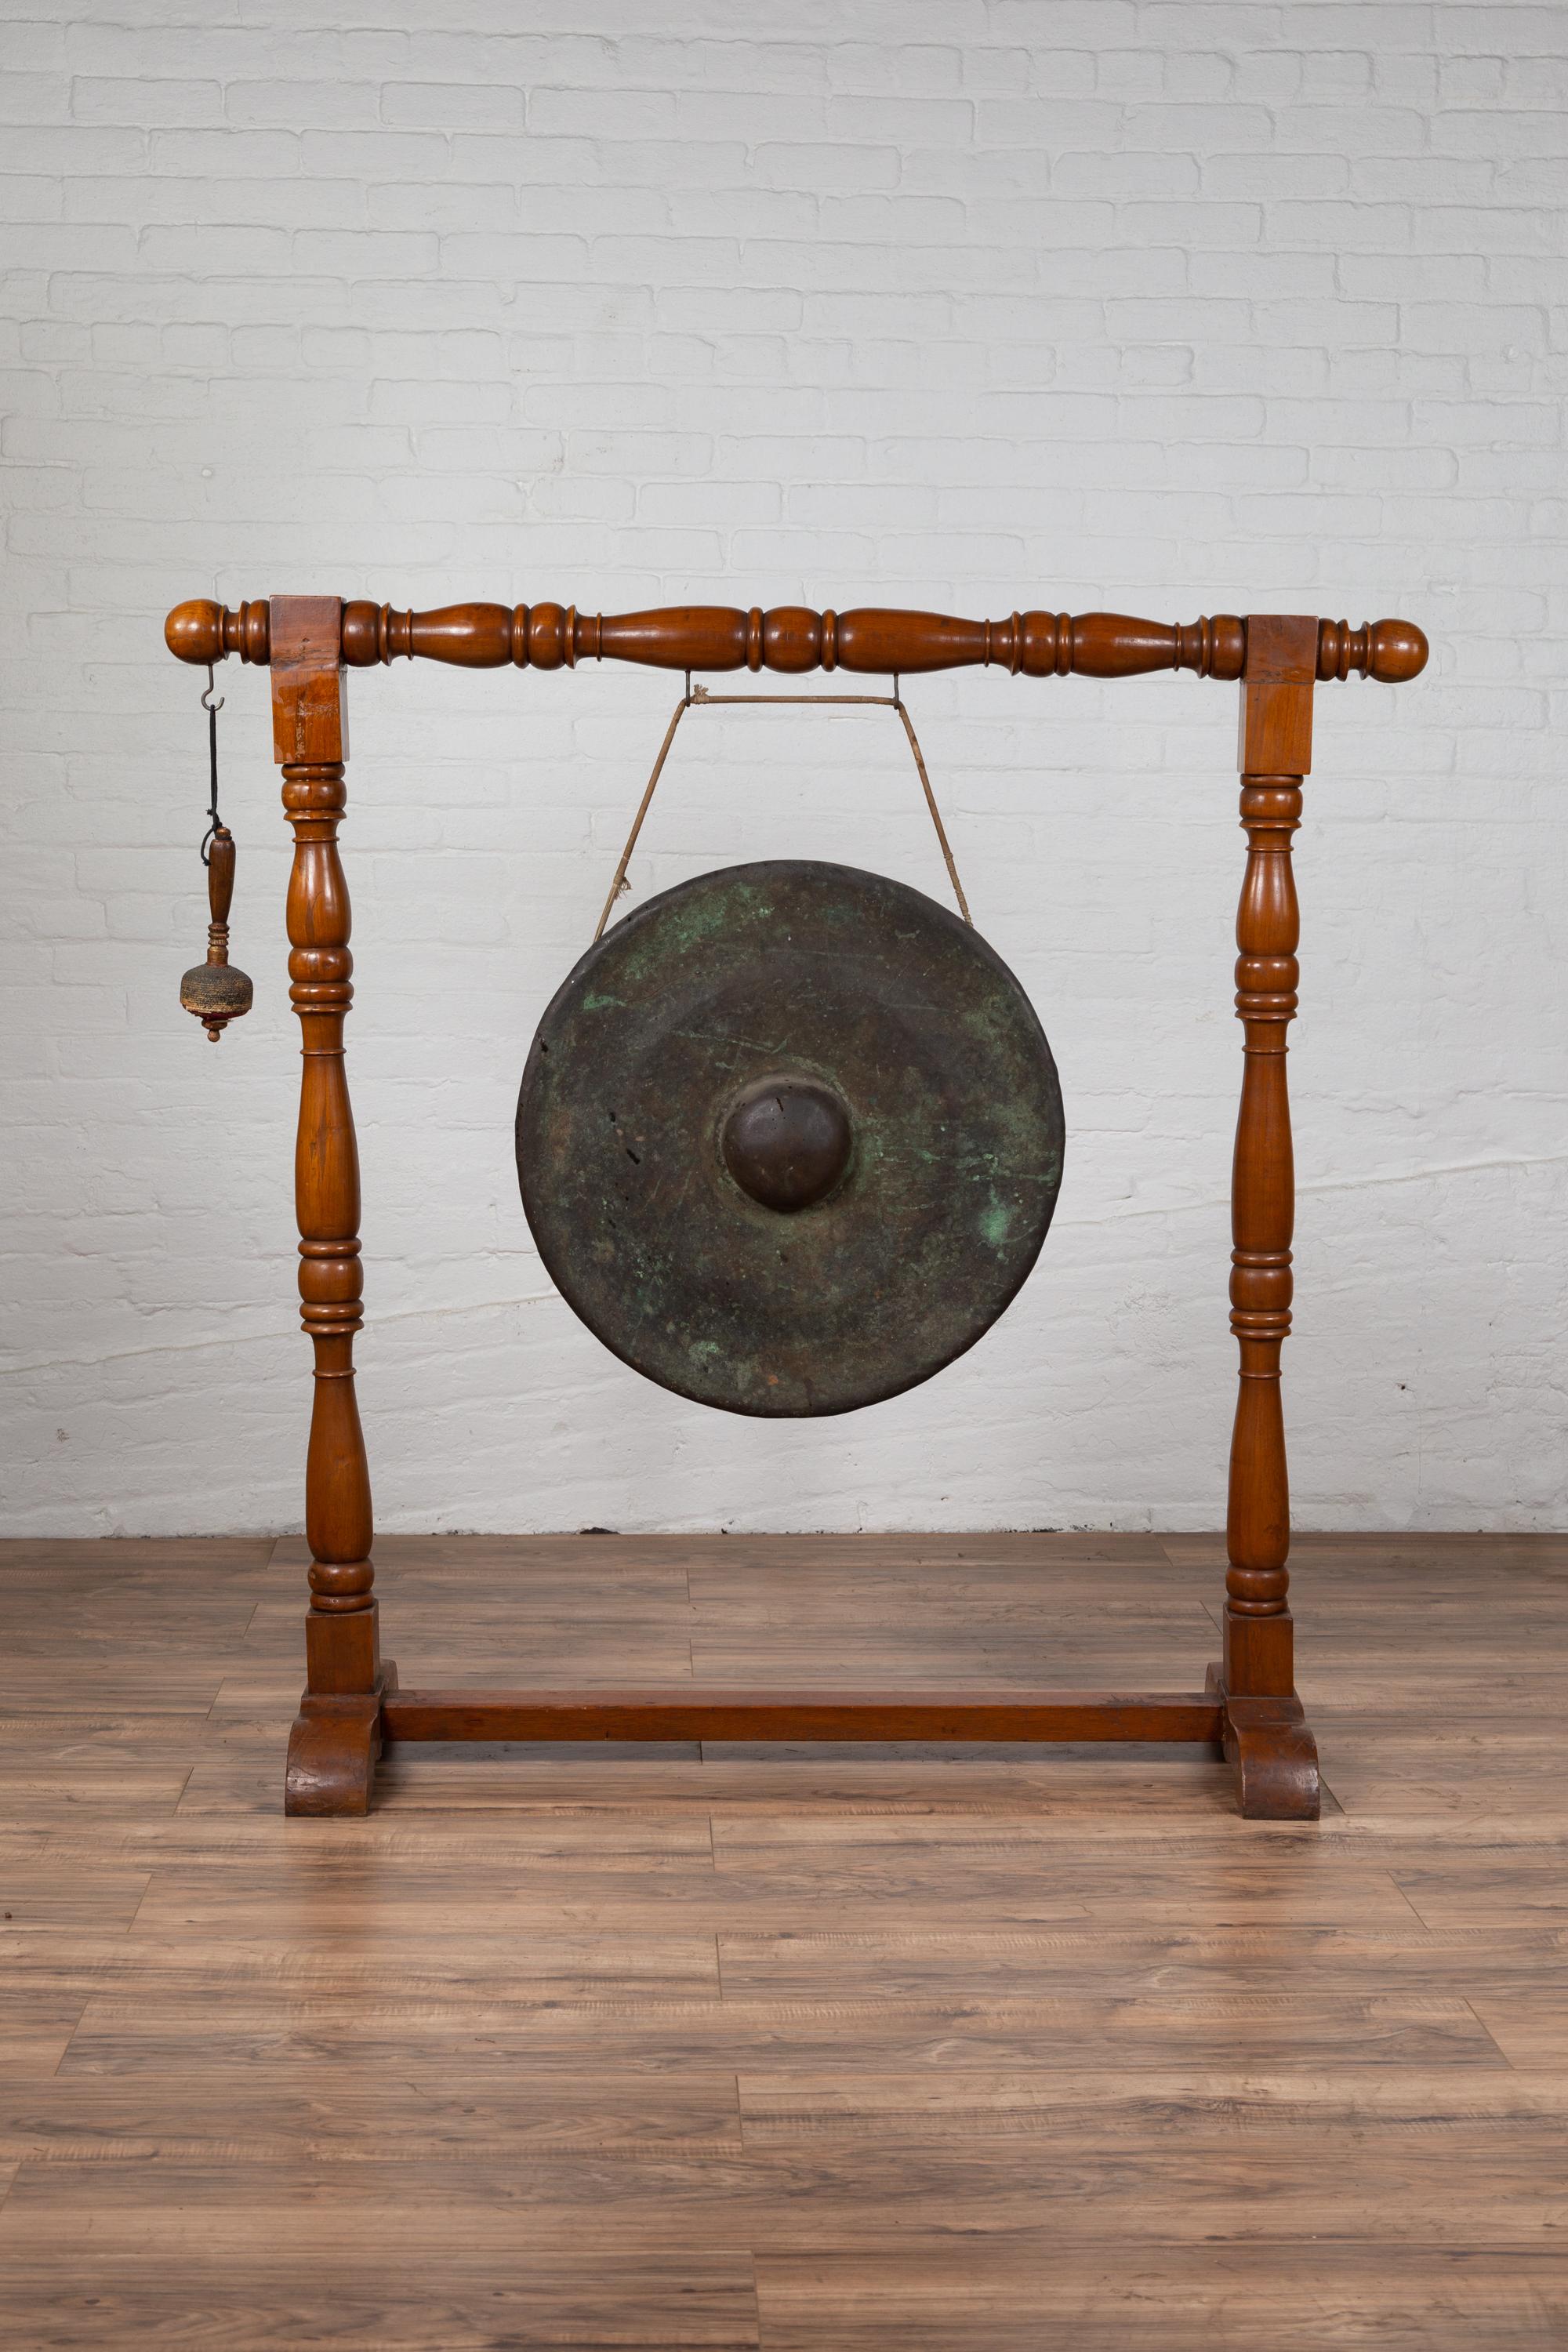 An antique Burmese bronze temple gong with mallet from the early 20th century, mounted on a wooden stand. Born in Burma during the early years of the 20th century, this exquisite bronze temple gong features a traditional circular shape accented with